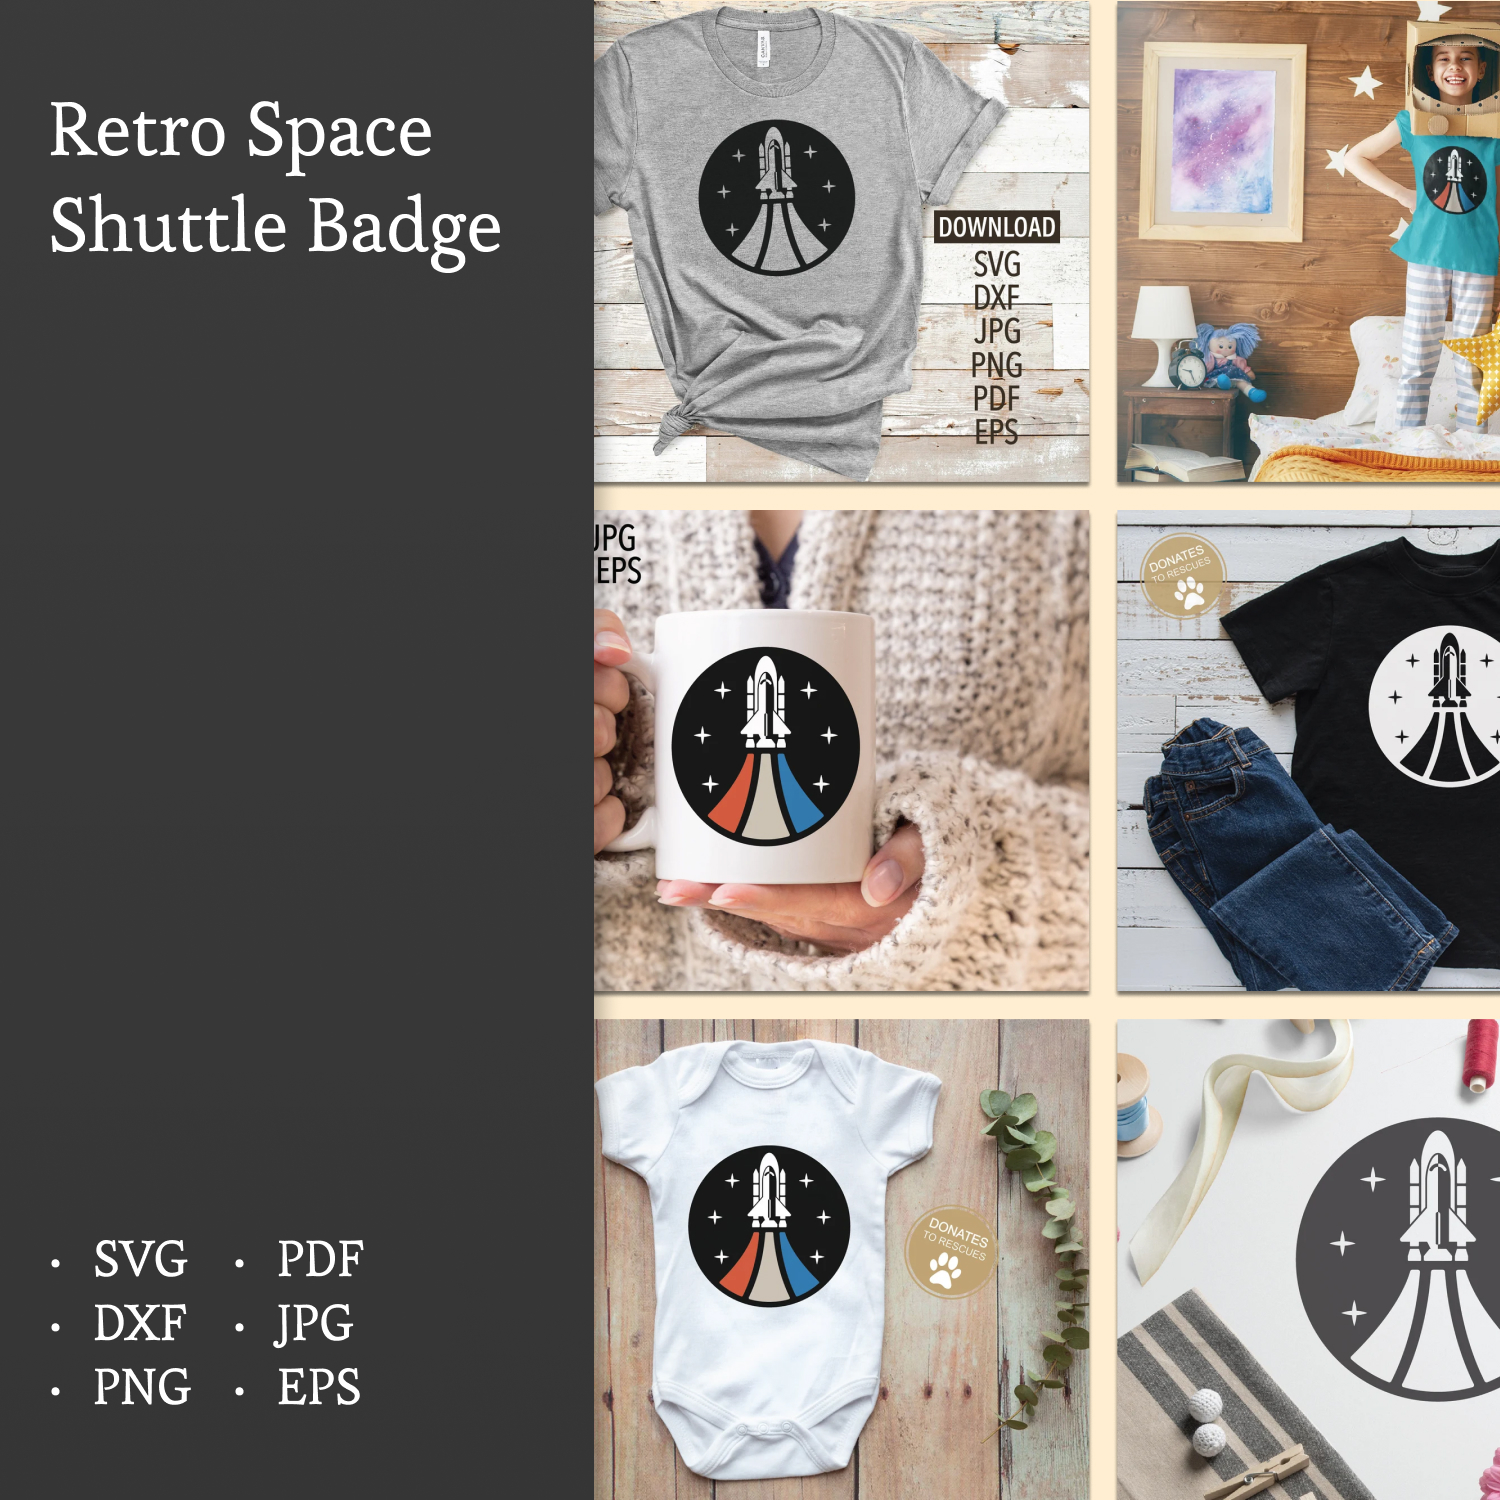 Retro space shuttle badge preview.